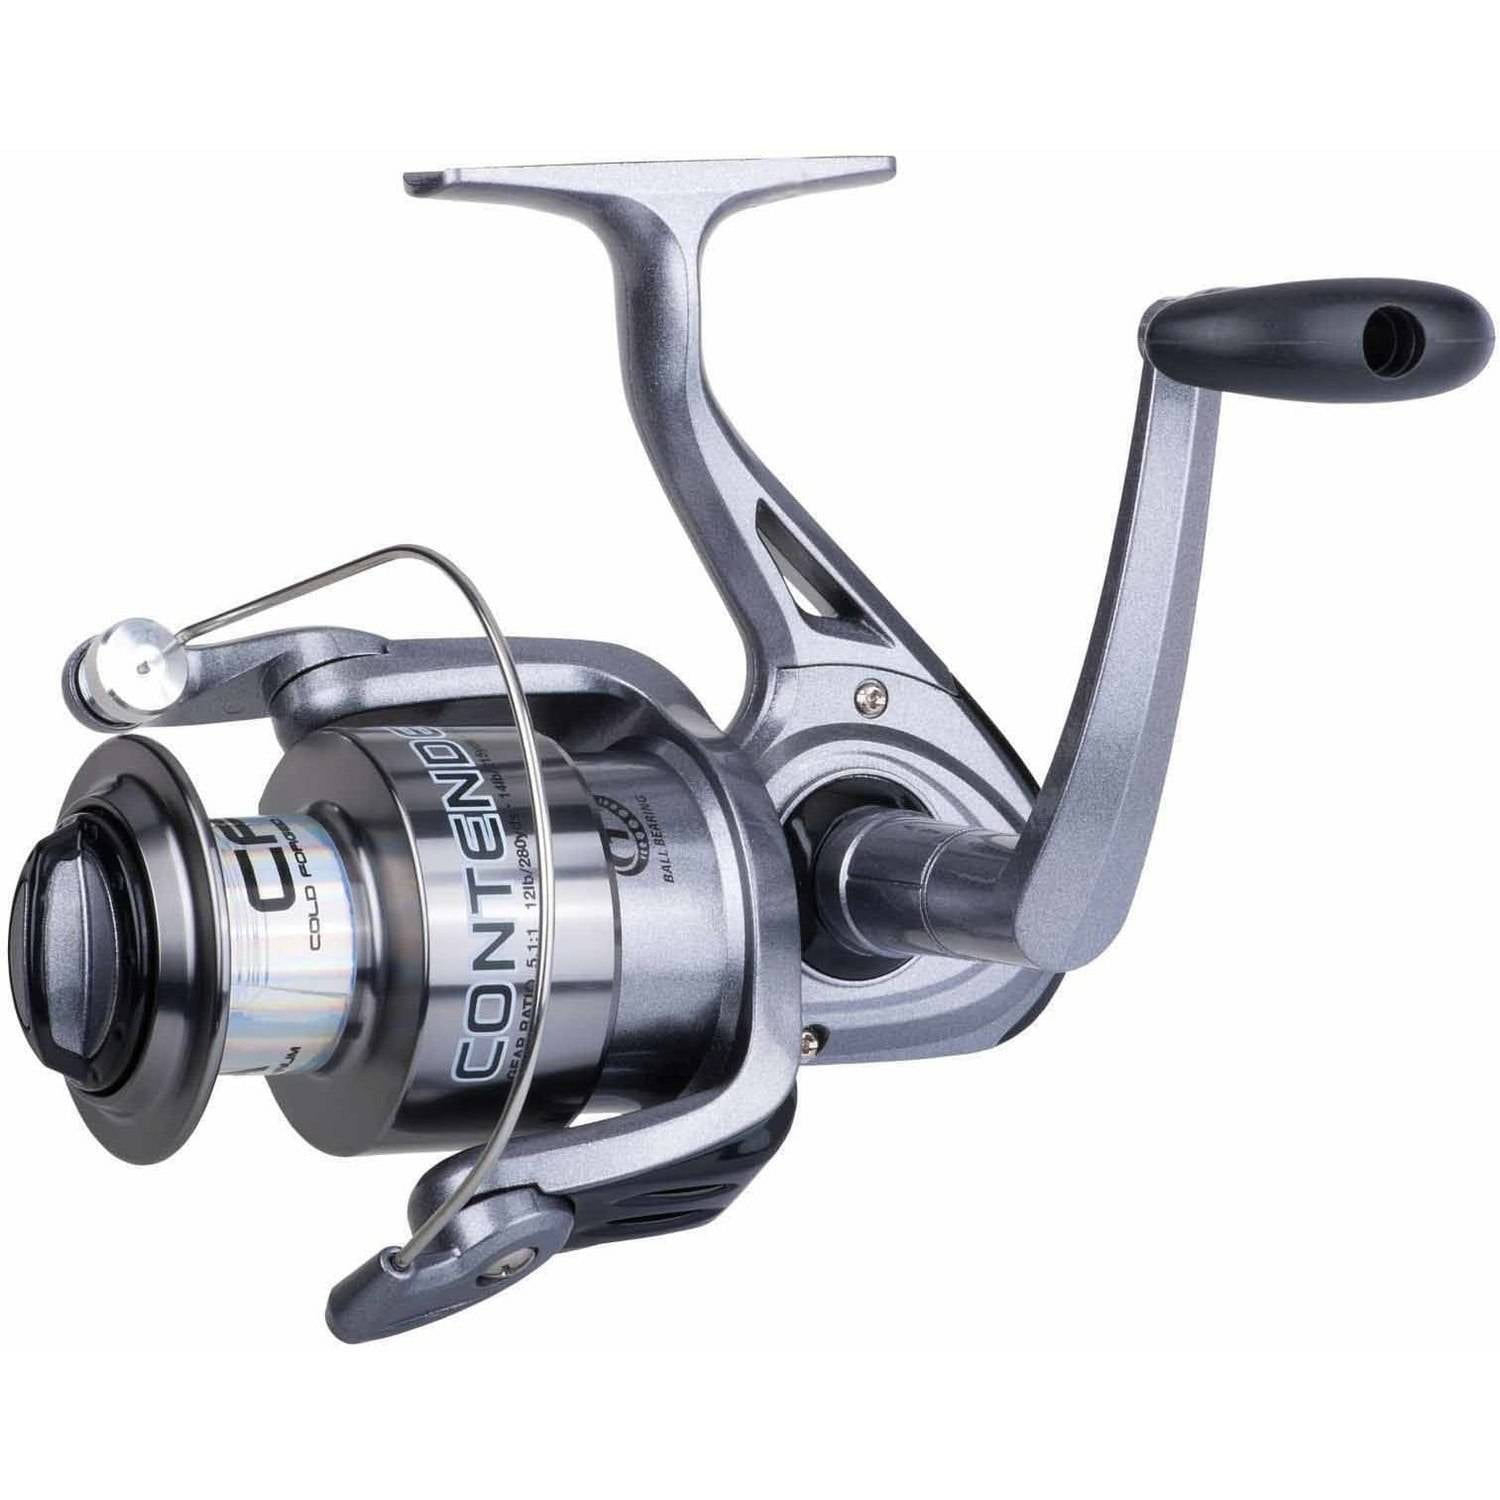 Shakespeare Contender Spinning Reel (Size: 70), Silver/Left Right Convertible